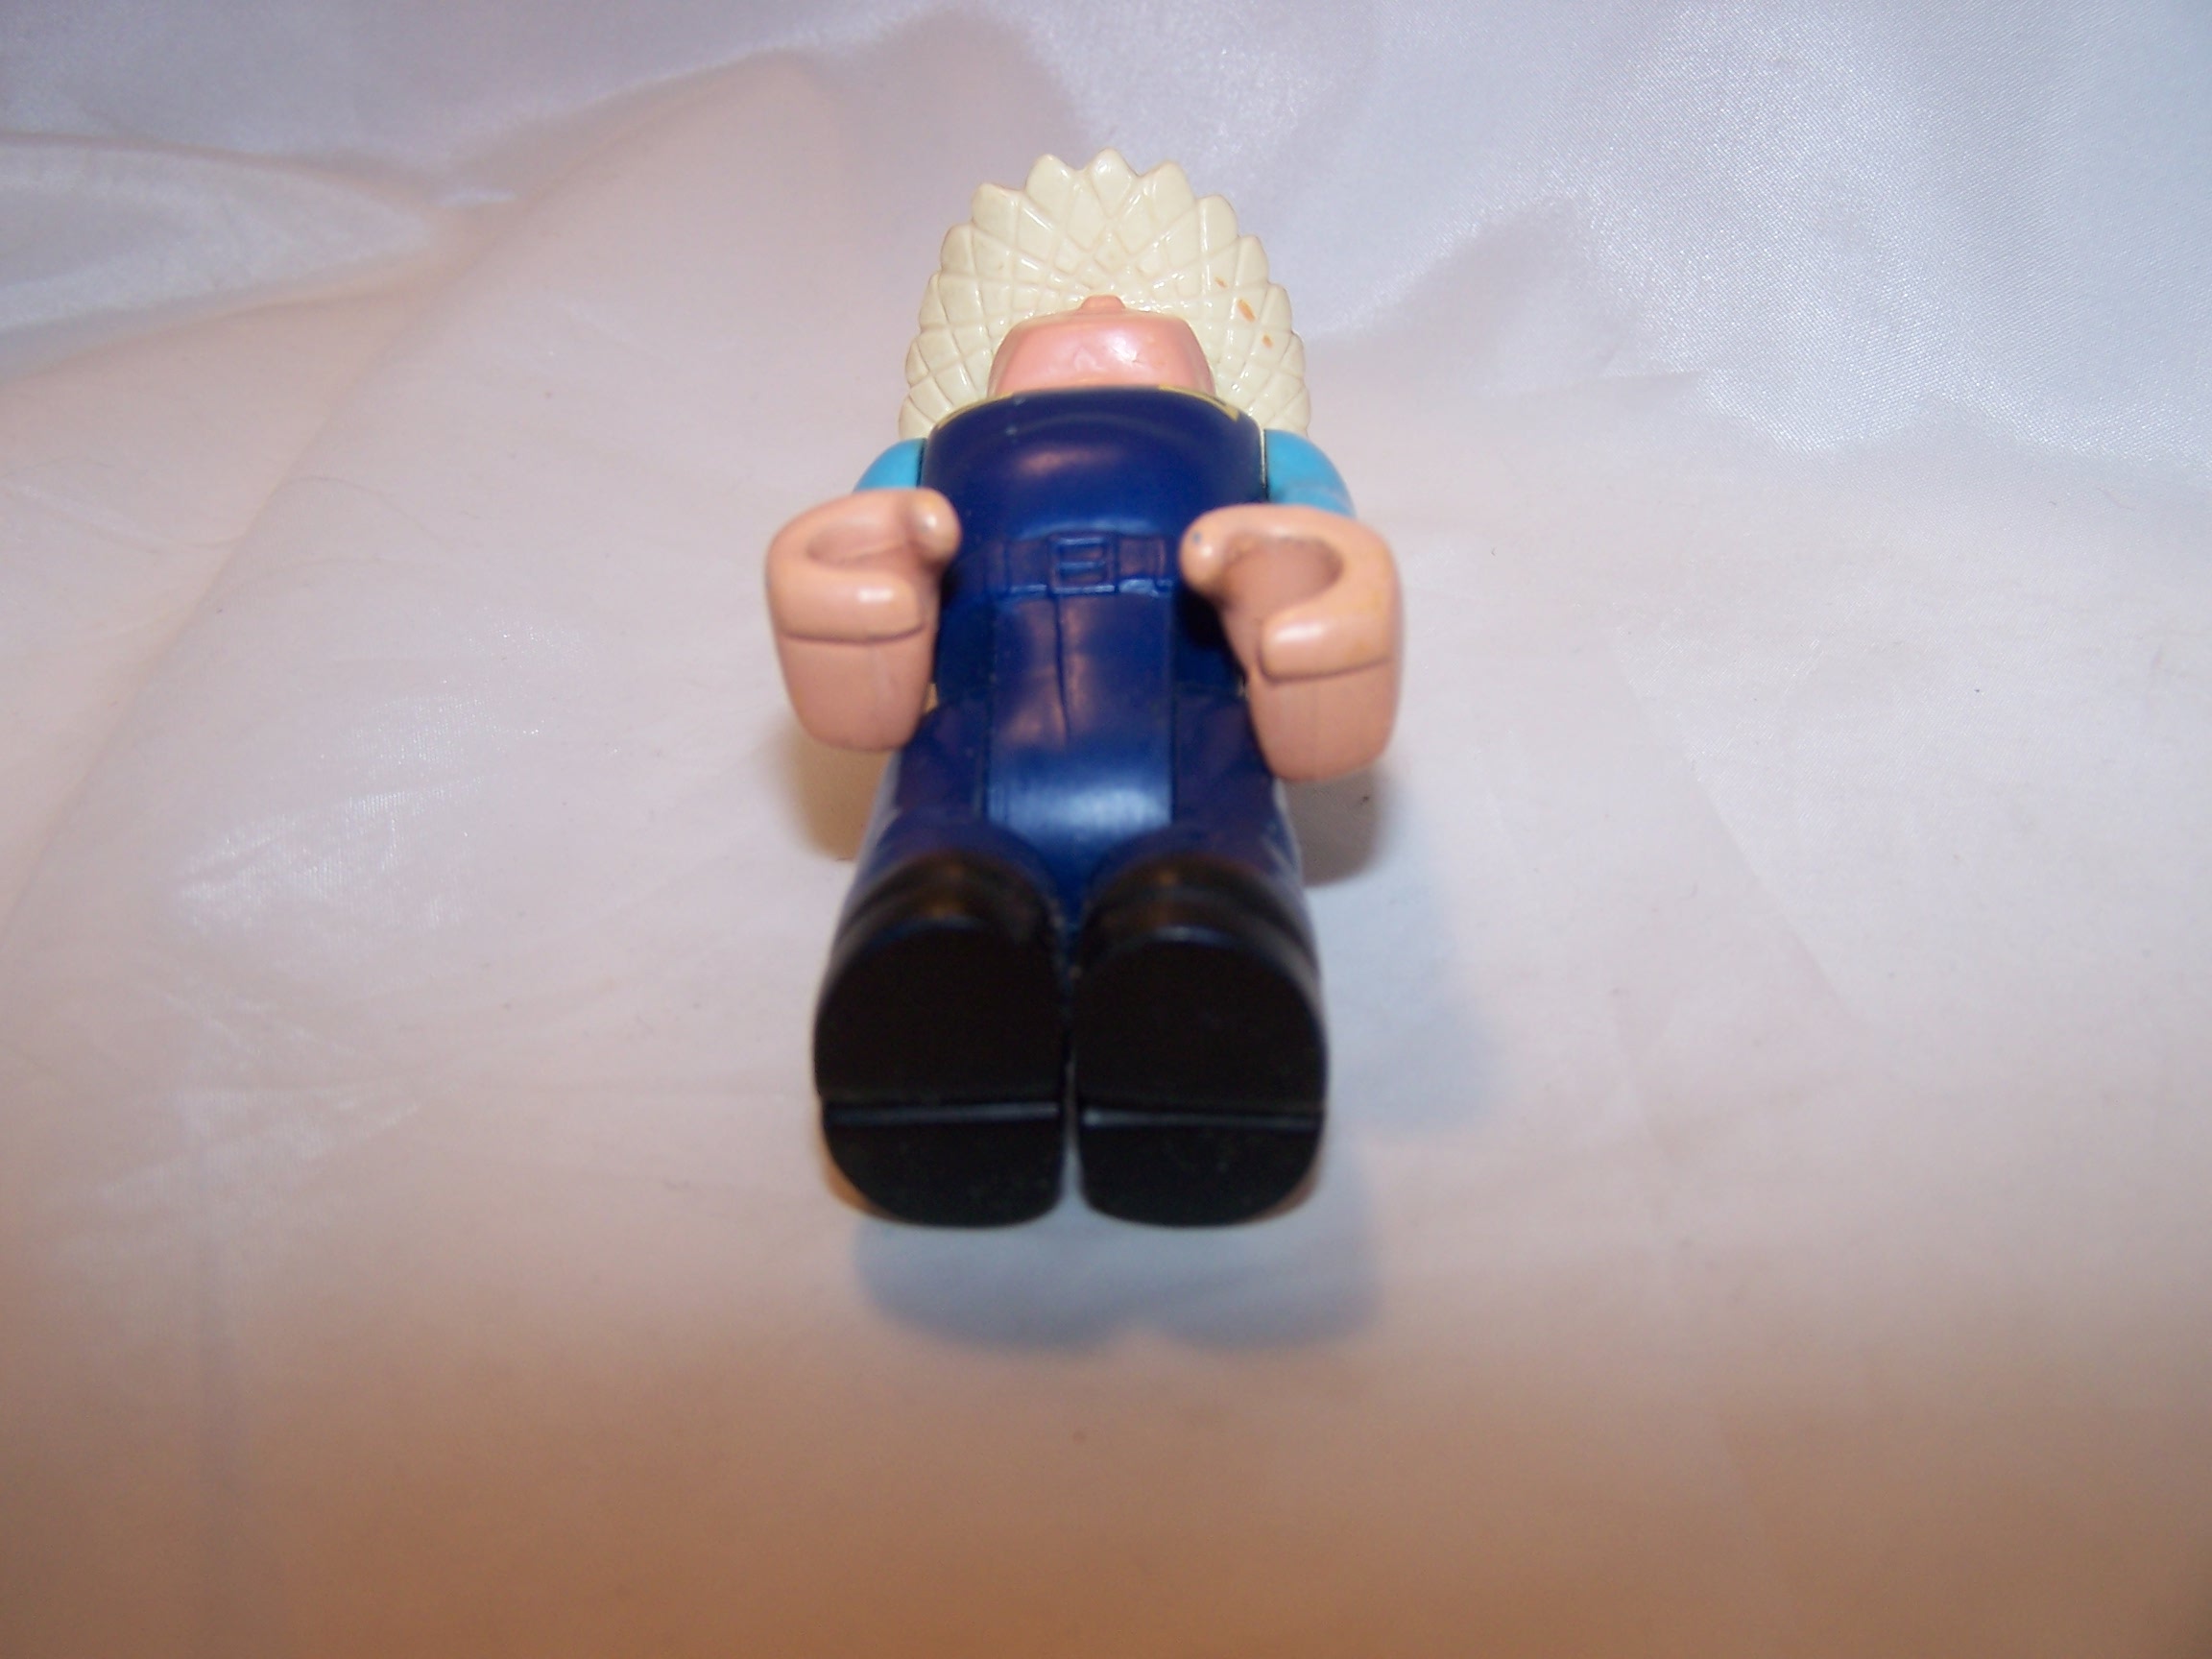 Image 5 of Farmer w Hat, Jointed, Plastic